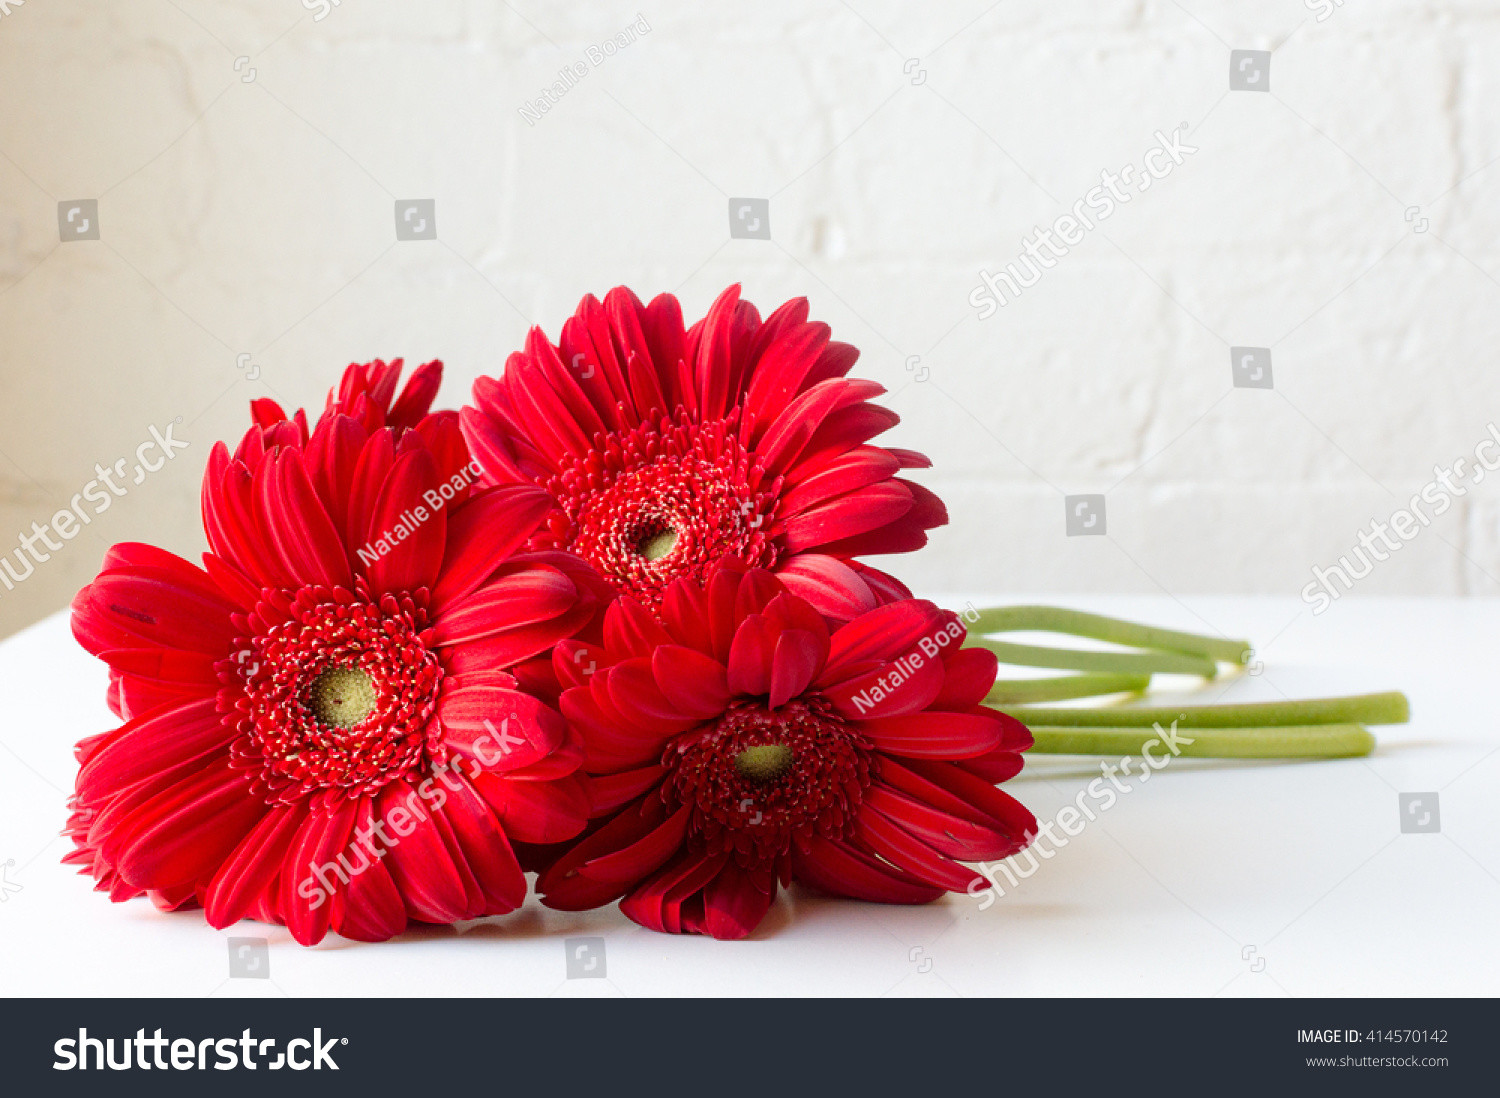 19 Amazing Gerbera Daisy In Vase 2024 free download gerbera daisy in vase of red gerberas lying on a white table against a white brick wall ez for id 414570142